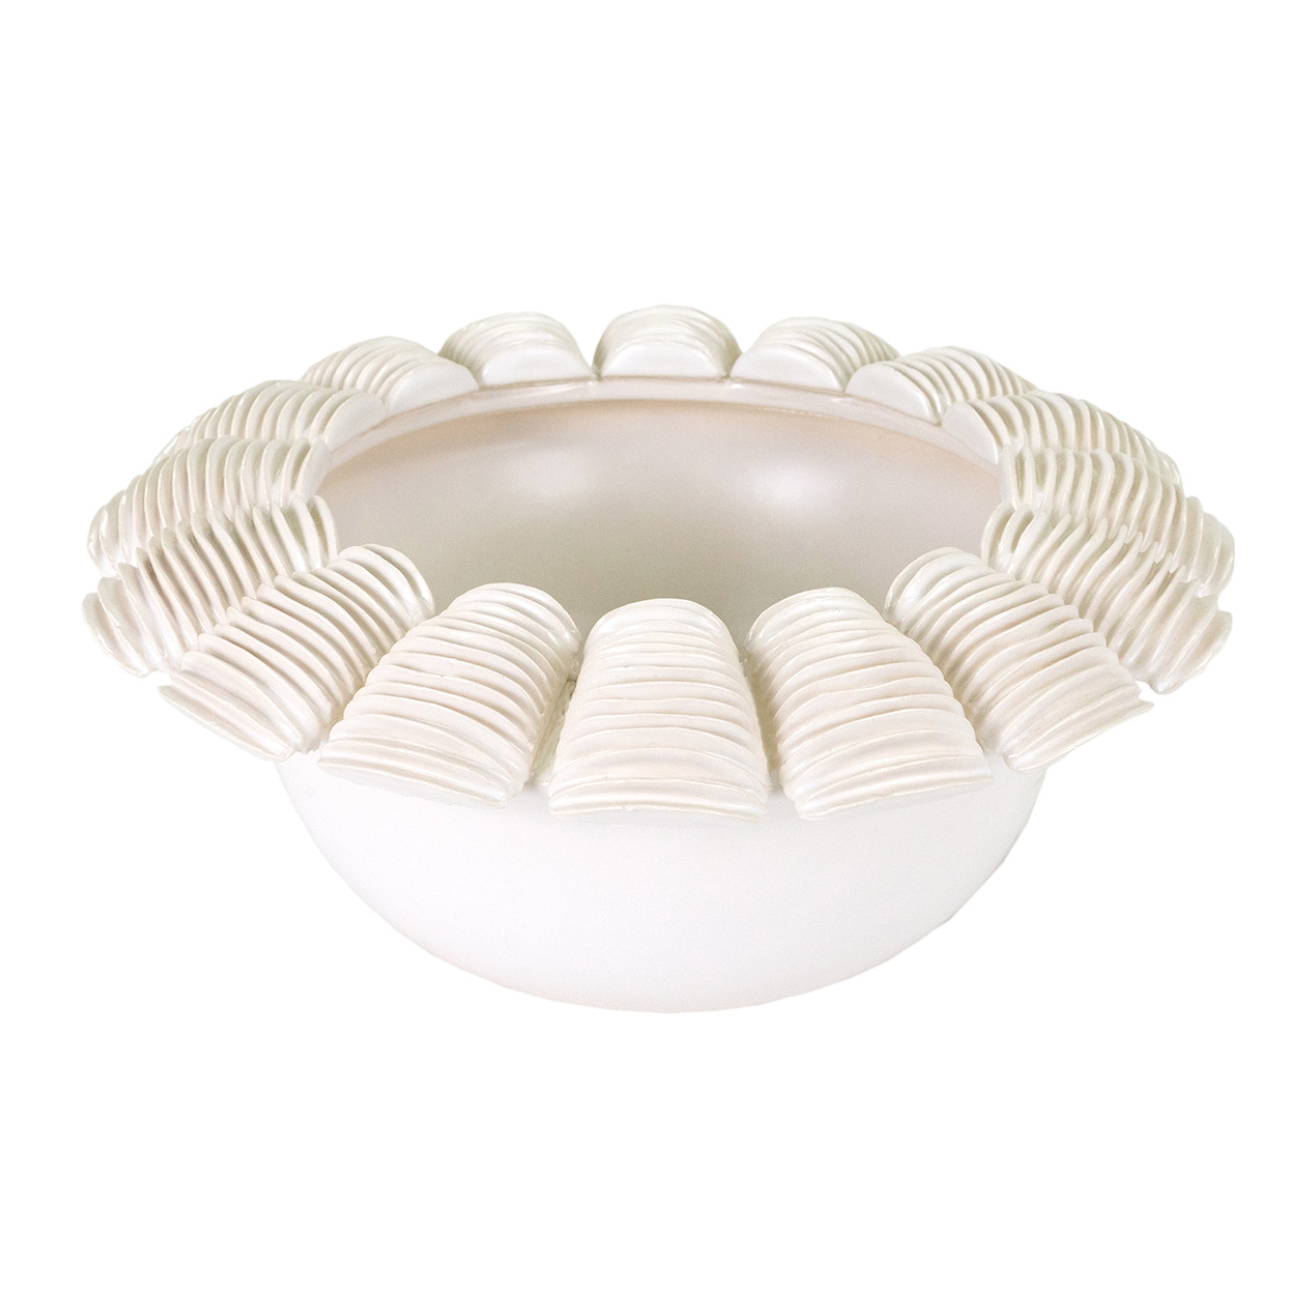 A white ceramic Biscay Bowl from The Import Collection with a decorative, scalloped edge featuring an intricate, repetitive pattern in Arizona style, set against a plain white background.